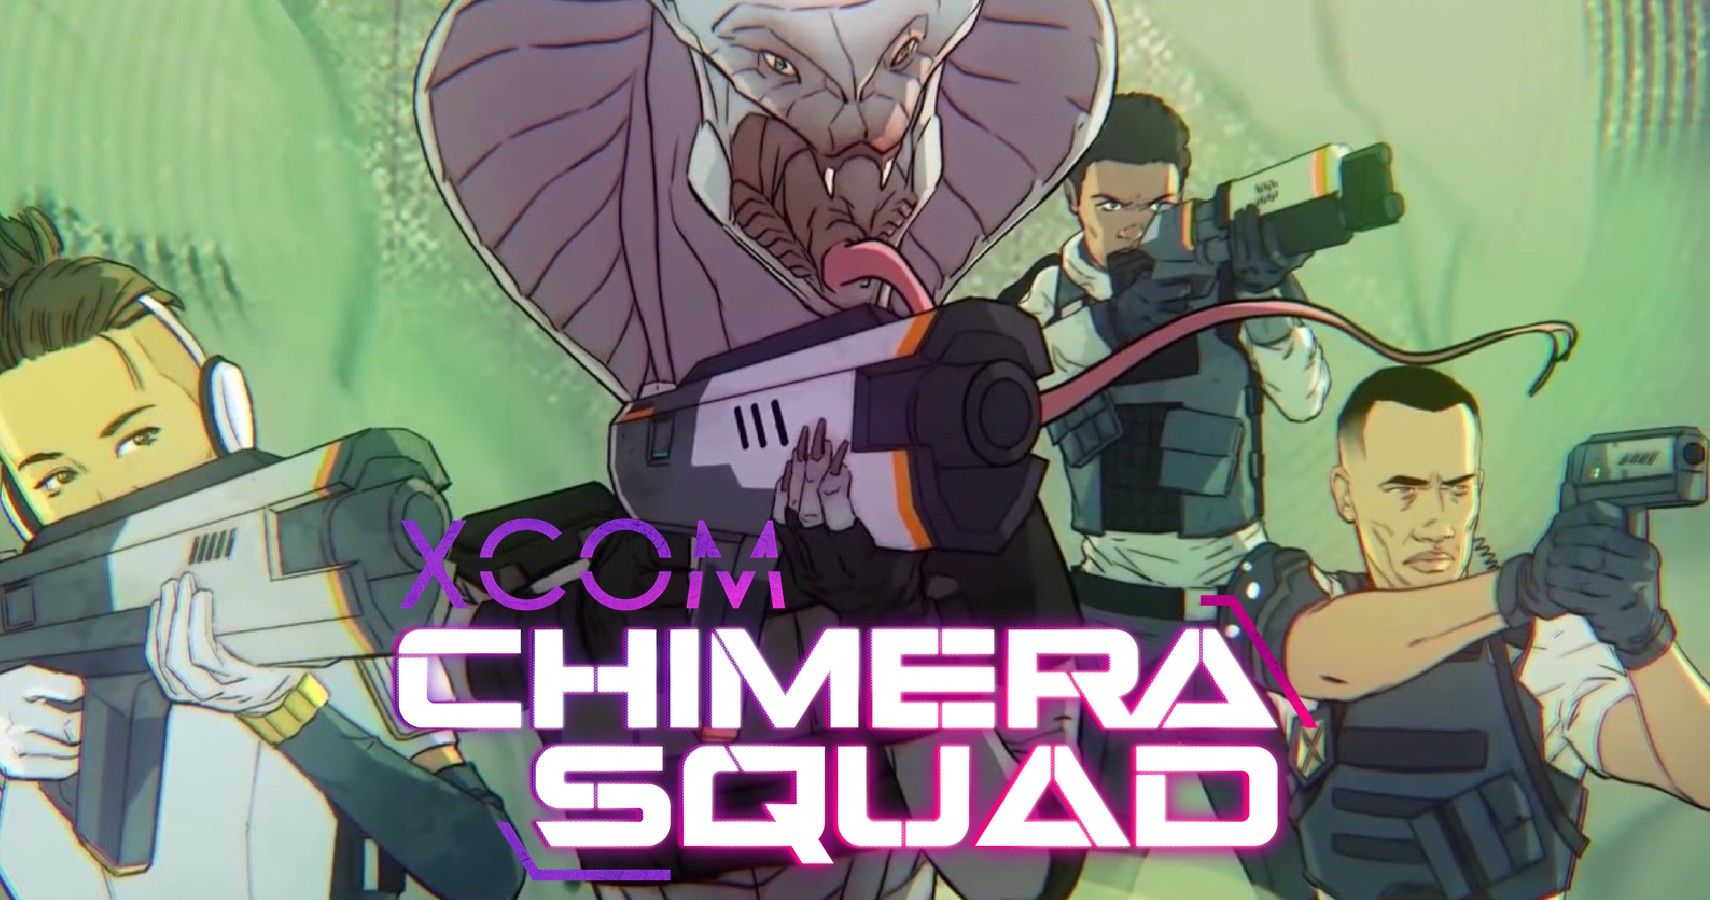 Xcom Chimera Squad 10 Tips To Make An Overpowered Squad